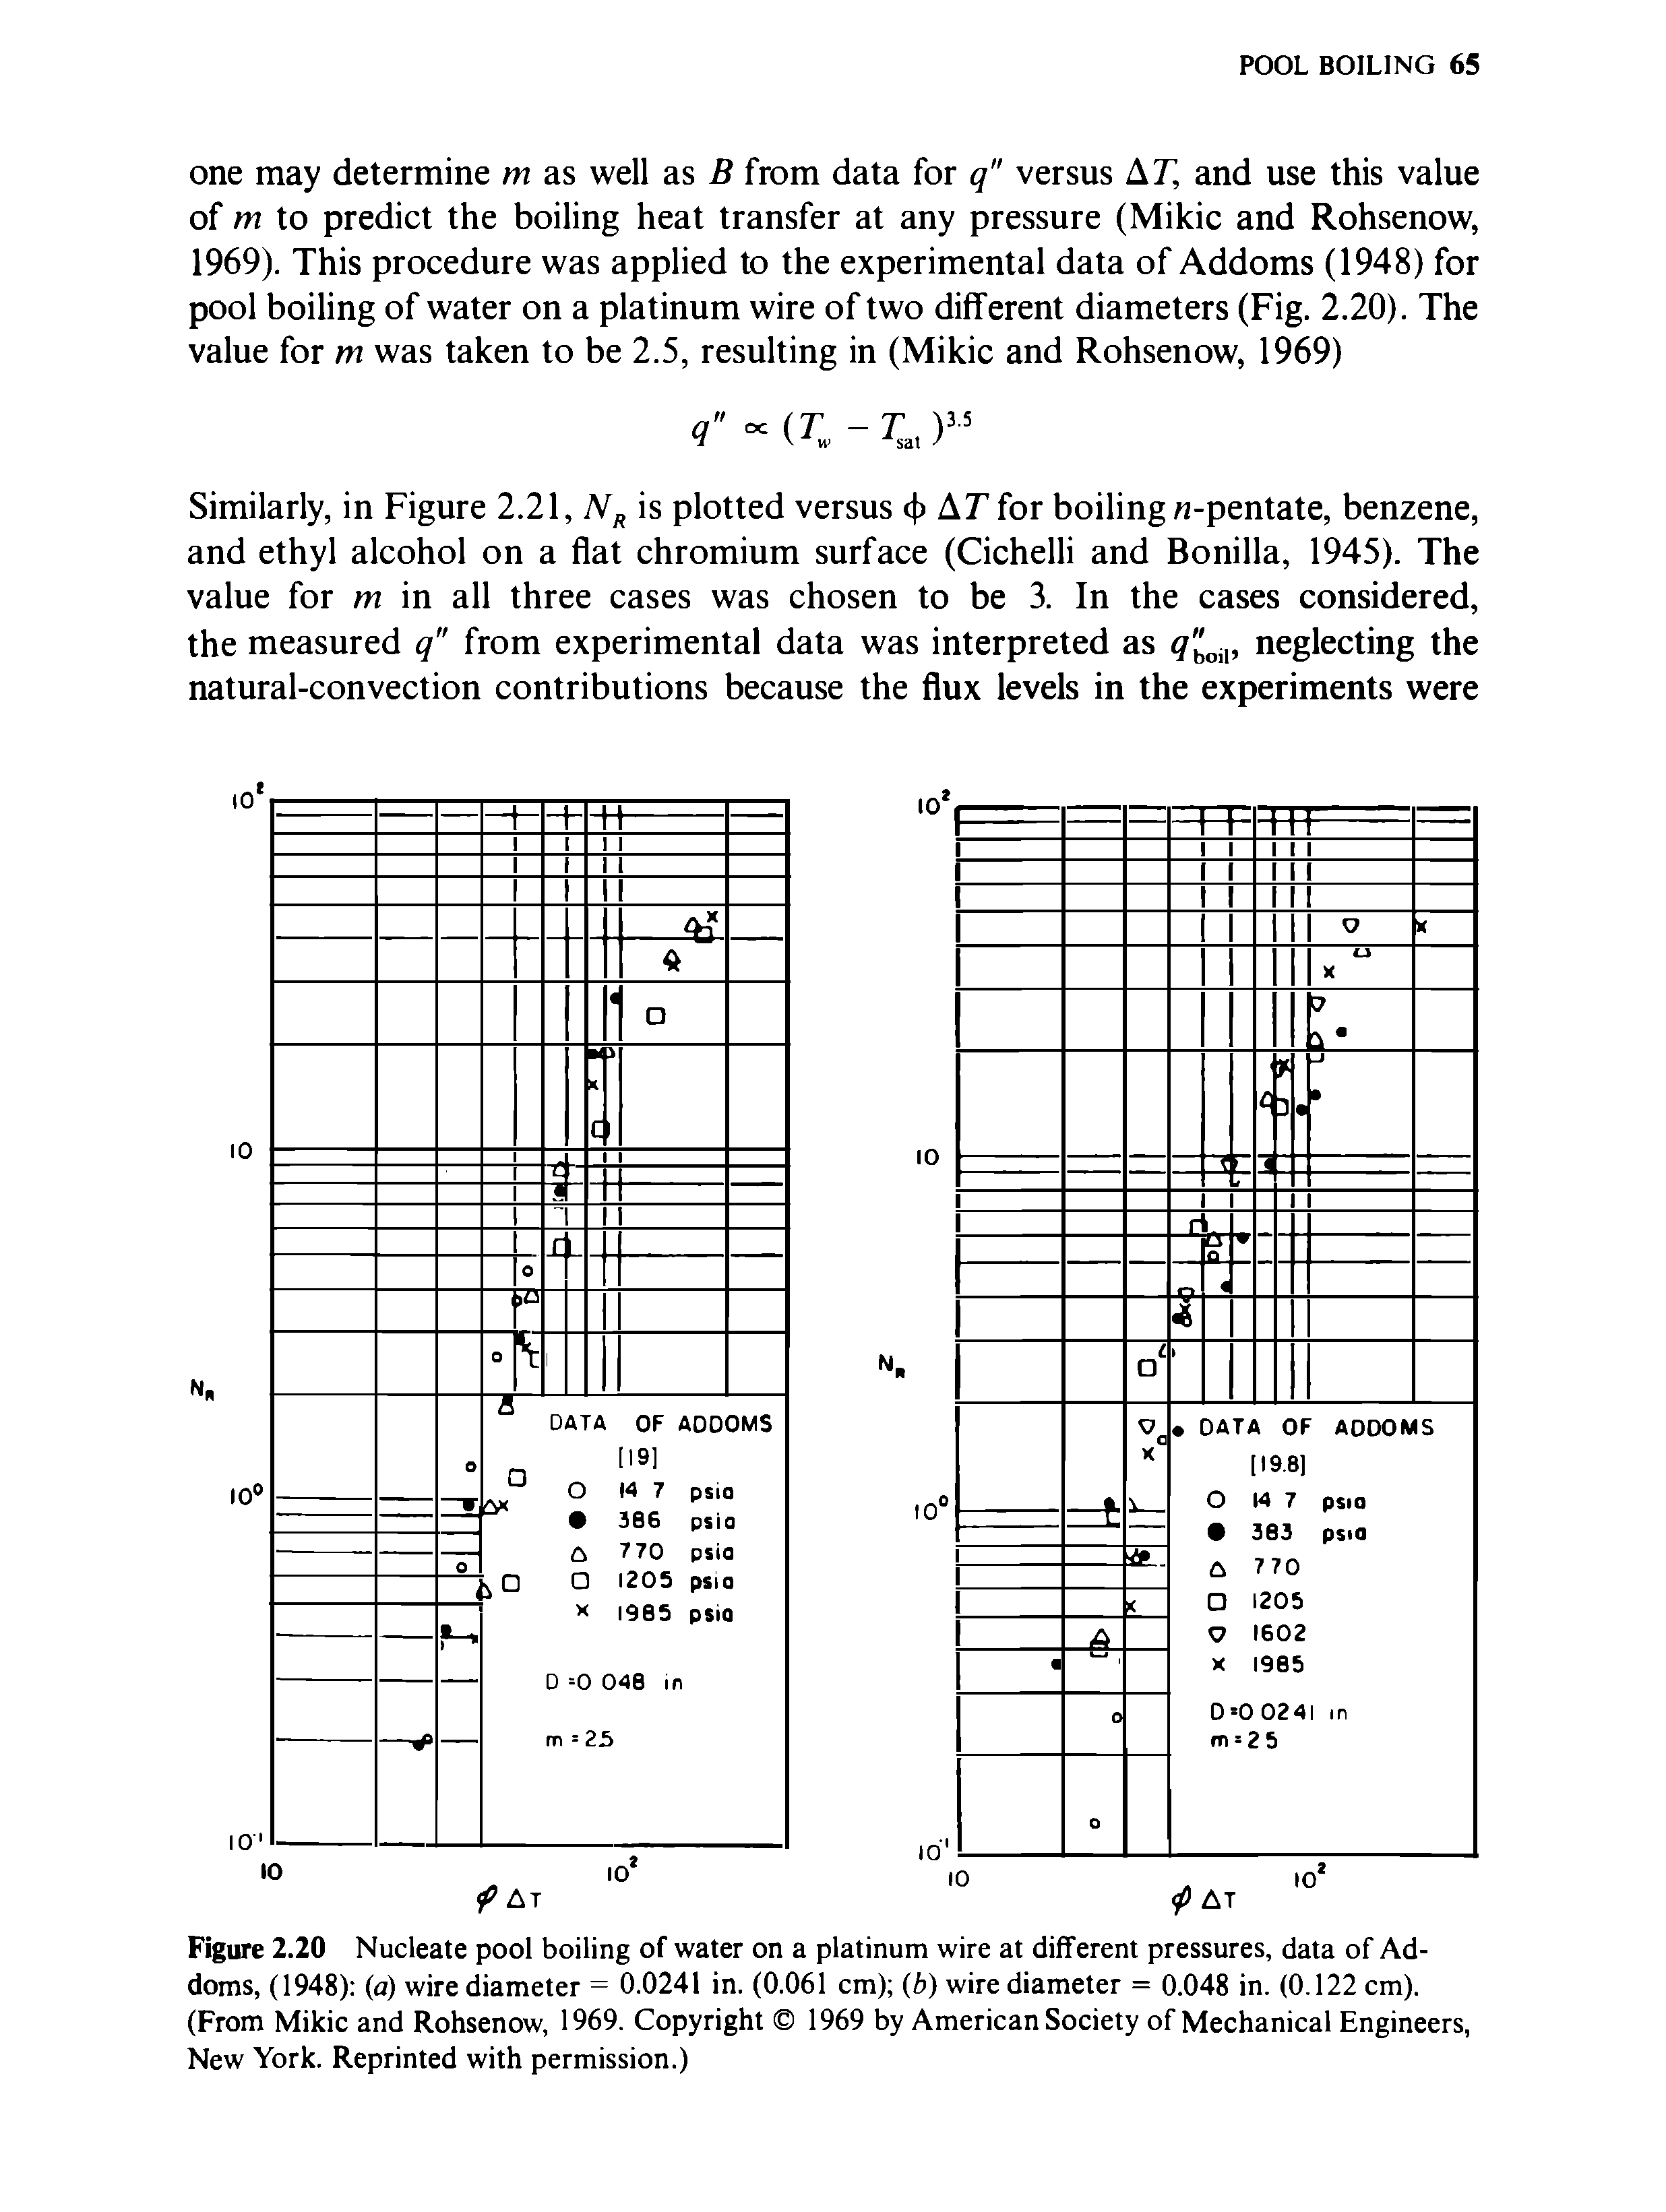 Figure 2.20 Nucleate pool boiling of water on a platinum wire at different pressures, data of Addoms, (1948) (a) wire diameter = 0.0241 in. (0.061 cm) (b) wire diameter = 0.048 in. (0.122 cm). (From Mikic and Rohsenow, 1969. Copyright 1969 by American Society of Mechanical Engineers, New York. Reprinted with permission.)...